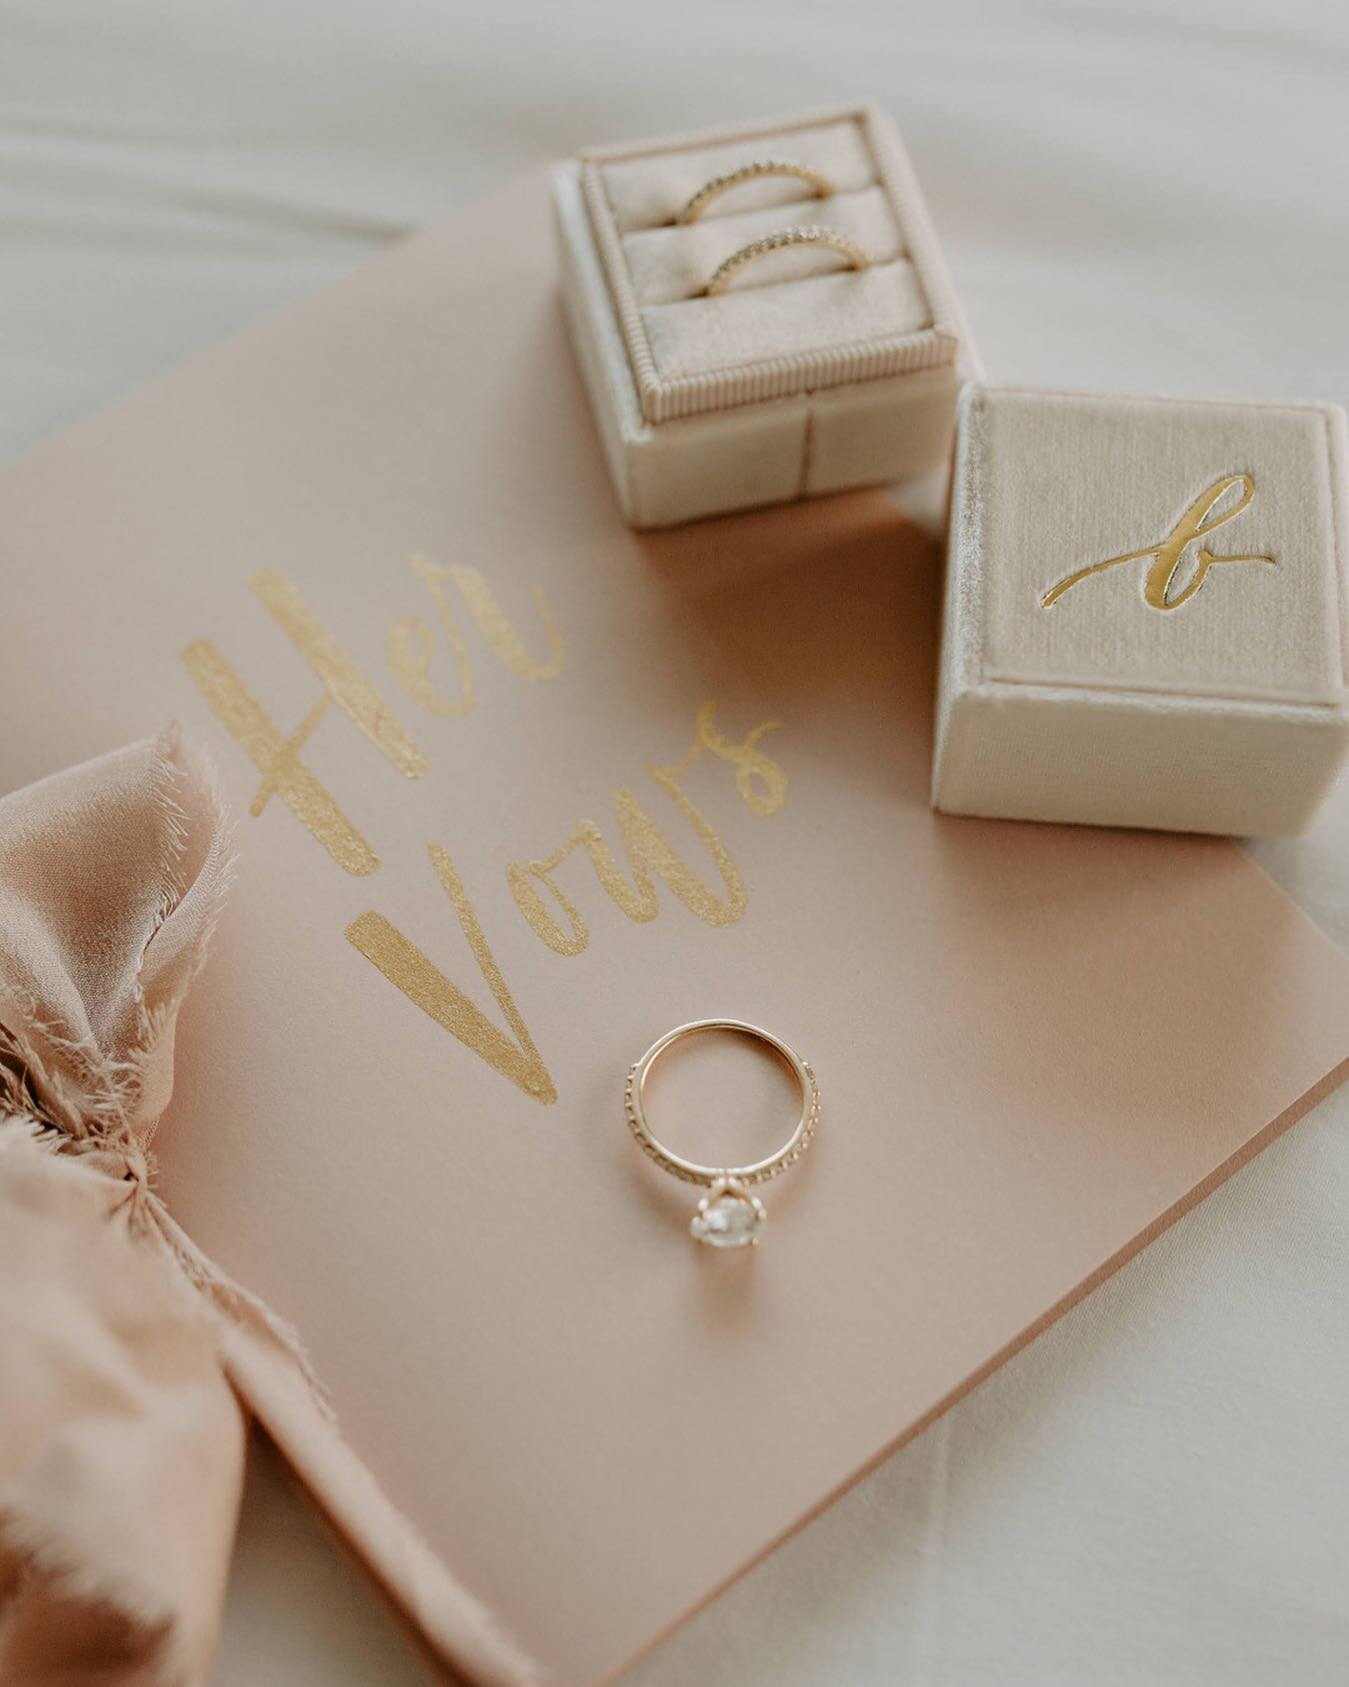 Let's talk about Vows. When deciding to write your own vows or not, to say them in private or at the ceremony, there's a lot that goes into this decision and there's no right or wrong answer. Each couple is unique and this decision should feel right 